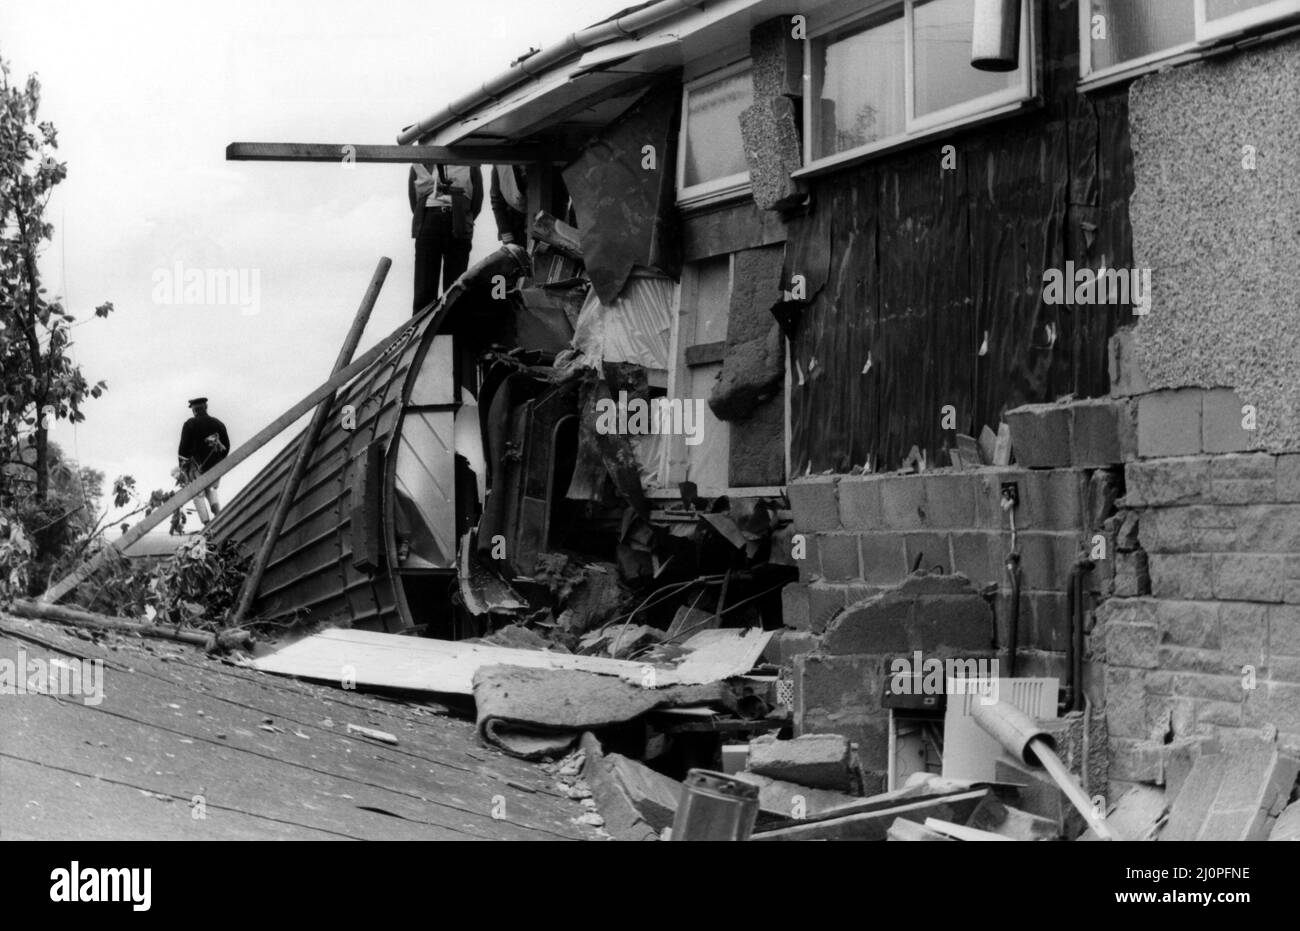 The crash of the Aberdeen to London sleeper train which careered off the track on the notorius Morpeth curve, just half a mile from the station. The crash happened at 10 minutes past midnight on 24th June, 1984   A carriage juts into the livingroom after ploughing into the house. Stock Photo